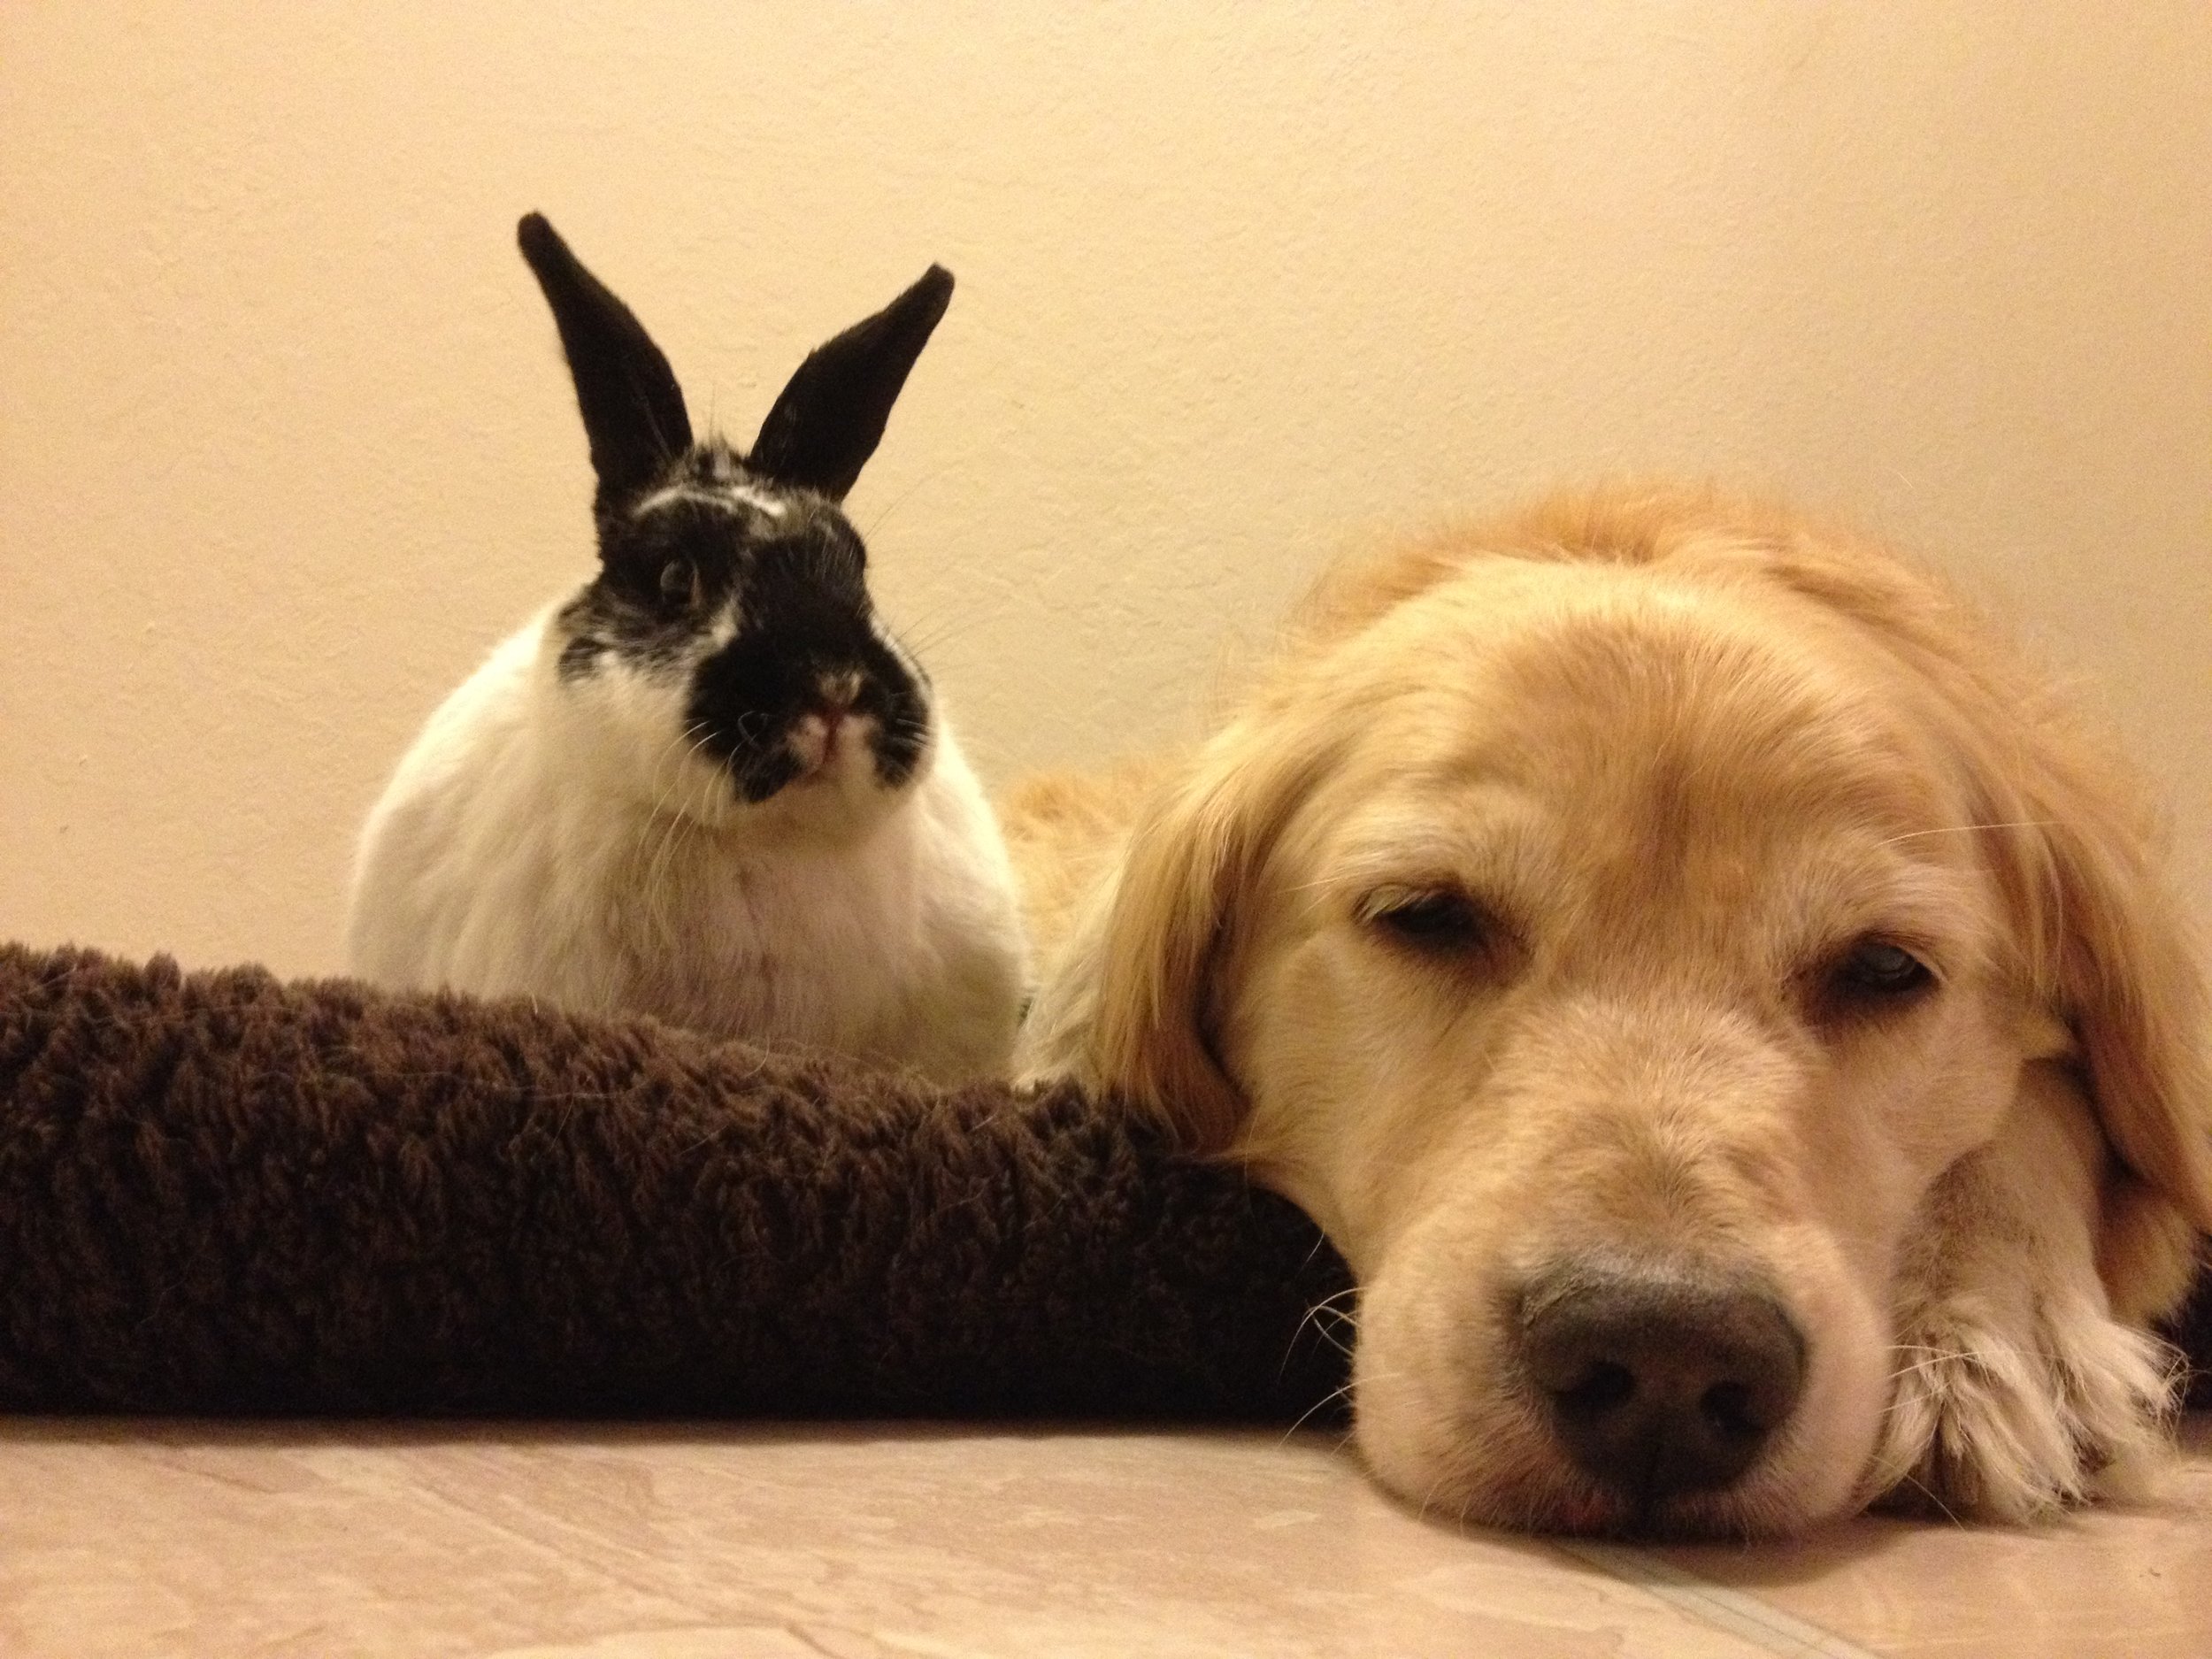 Security Bunny Stays Alert While Pup Sleeps